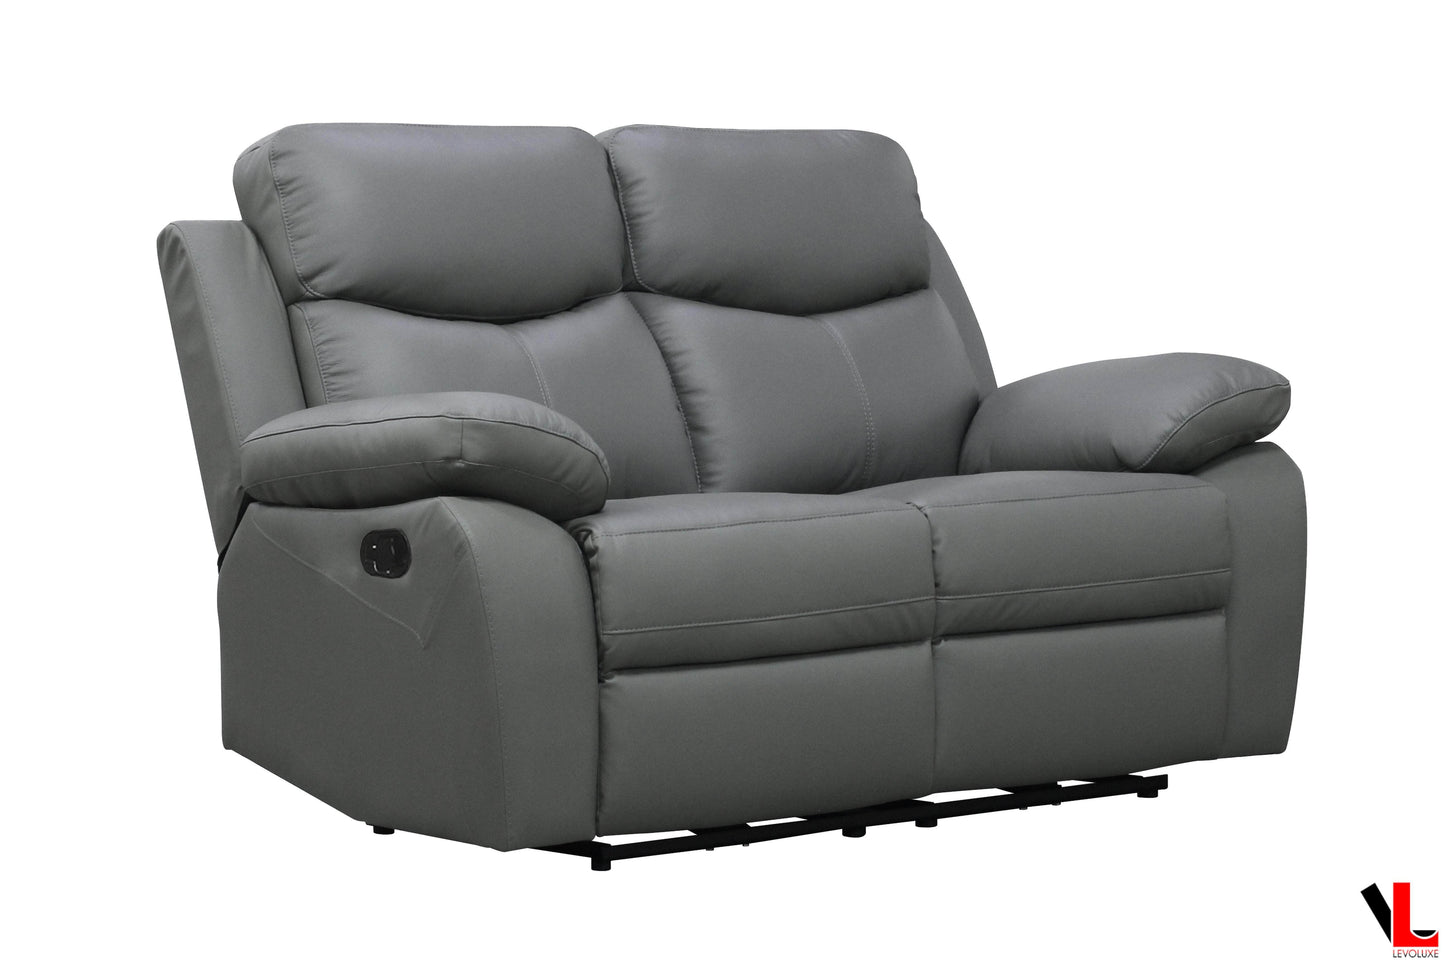 Levoluxe Loveseat Aveon 62" Pillow Top Arm Reclining Loveseat in Leather Match - Available in 2 Colours